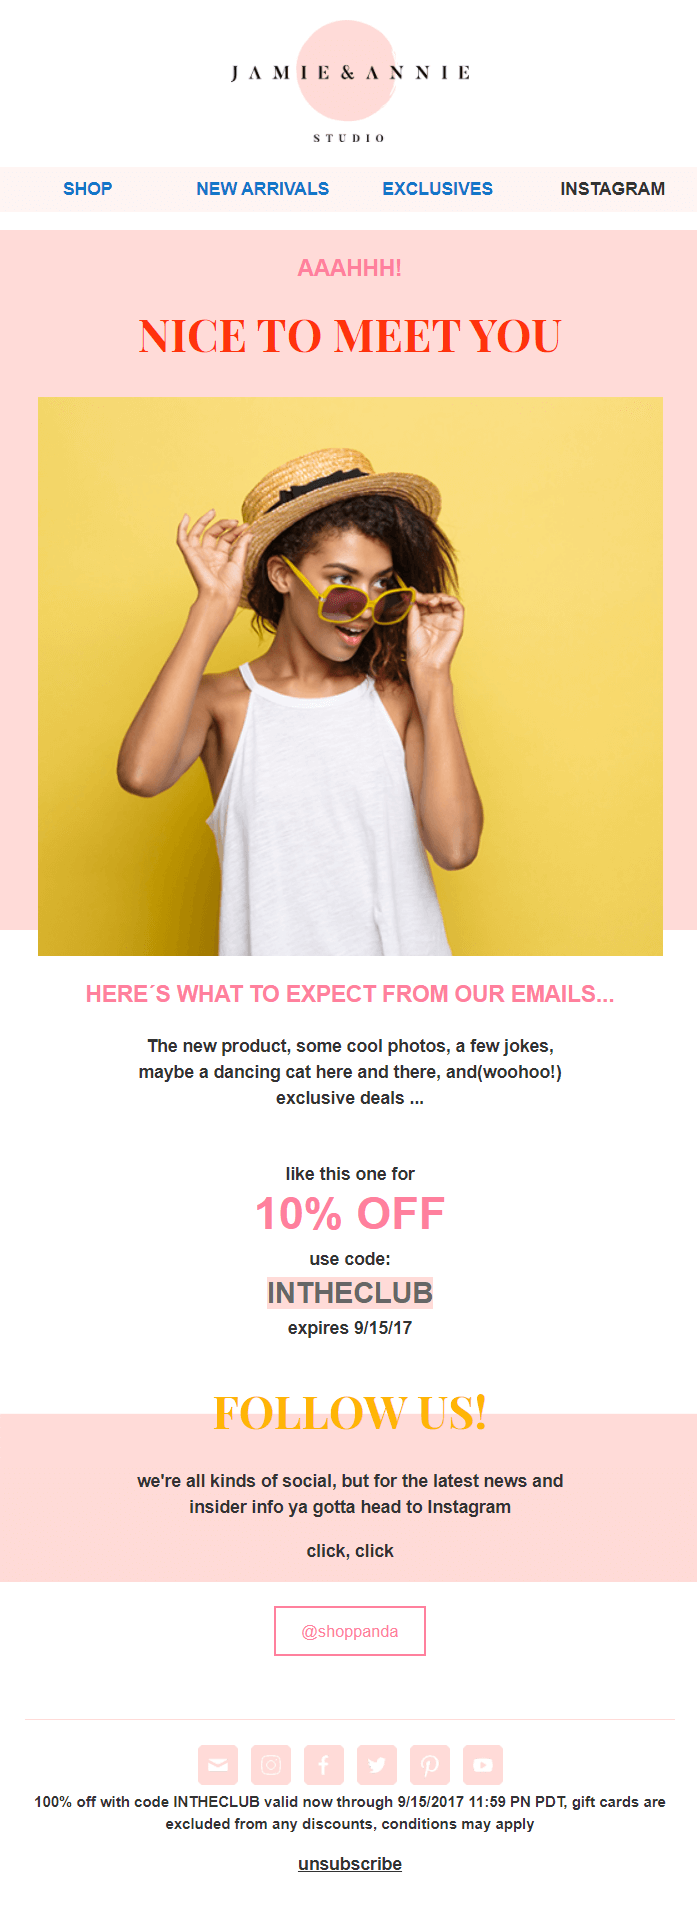 example of a welcome email by Jamie & Annie brand